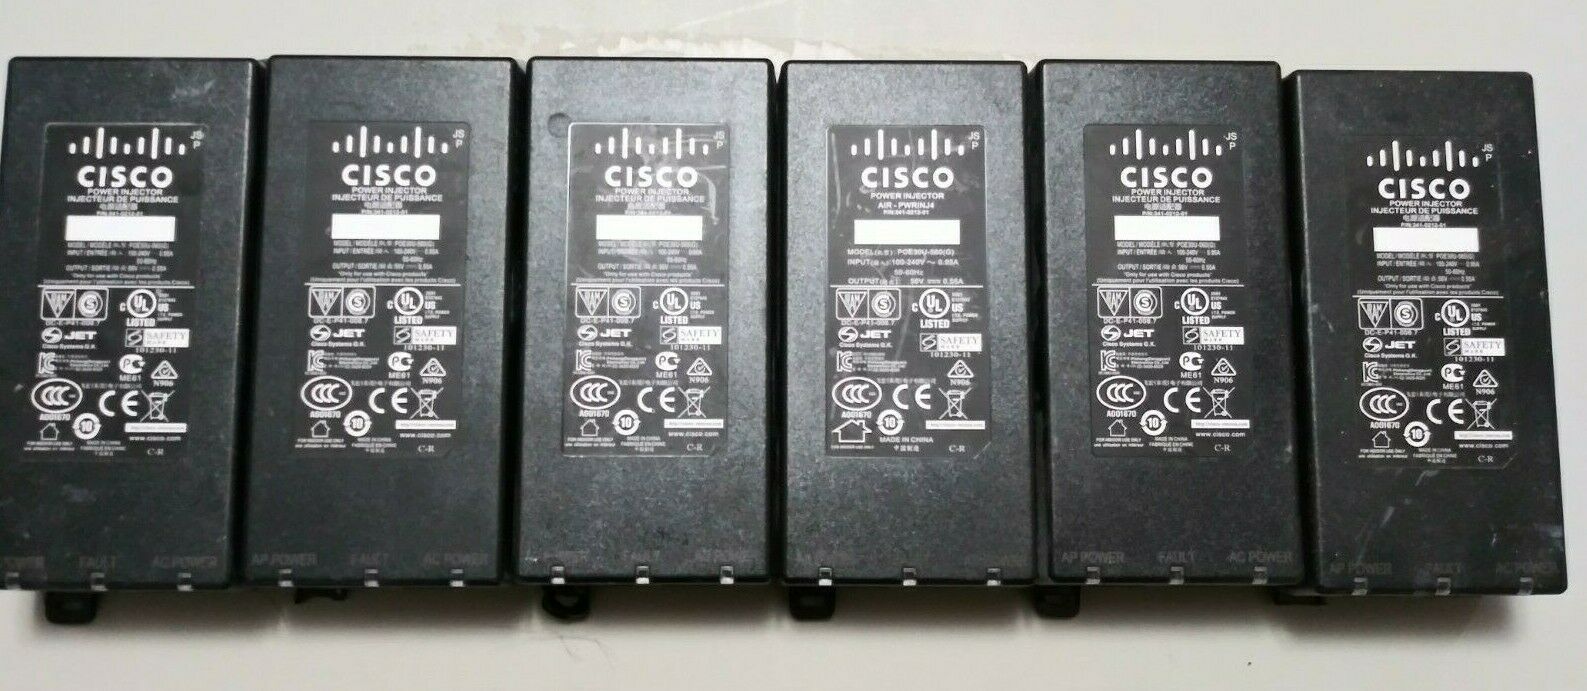 Lot of 6 Genuine Cisco Aironet Power Injector 341-0212-01 56V .55A